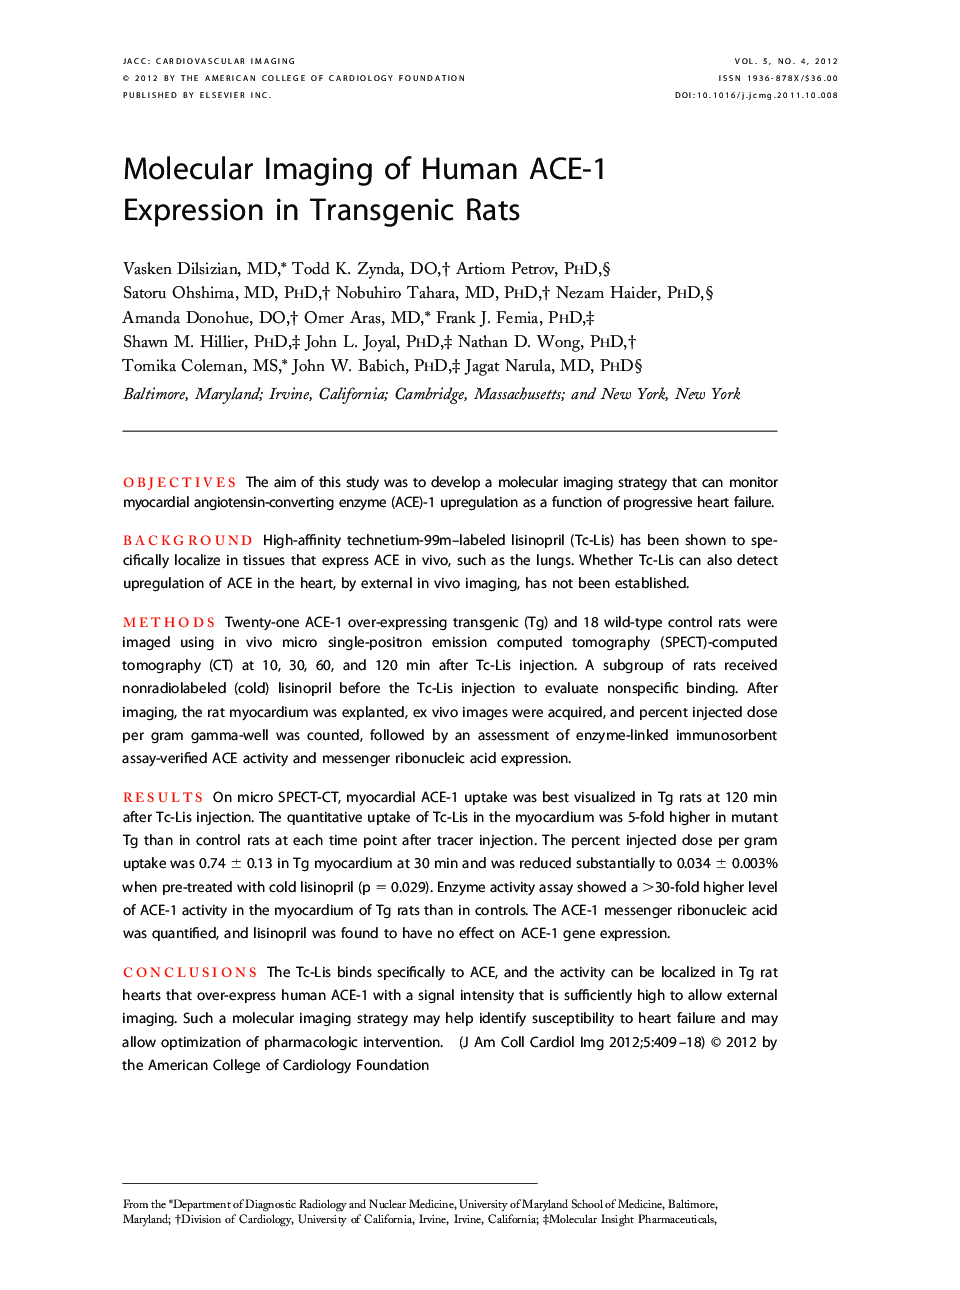 Molecular Imaging of Human ACE-1 Expression in Transgenic Rats 